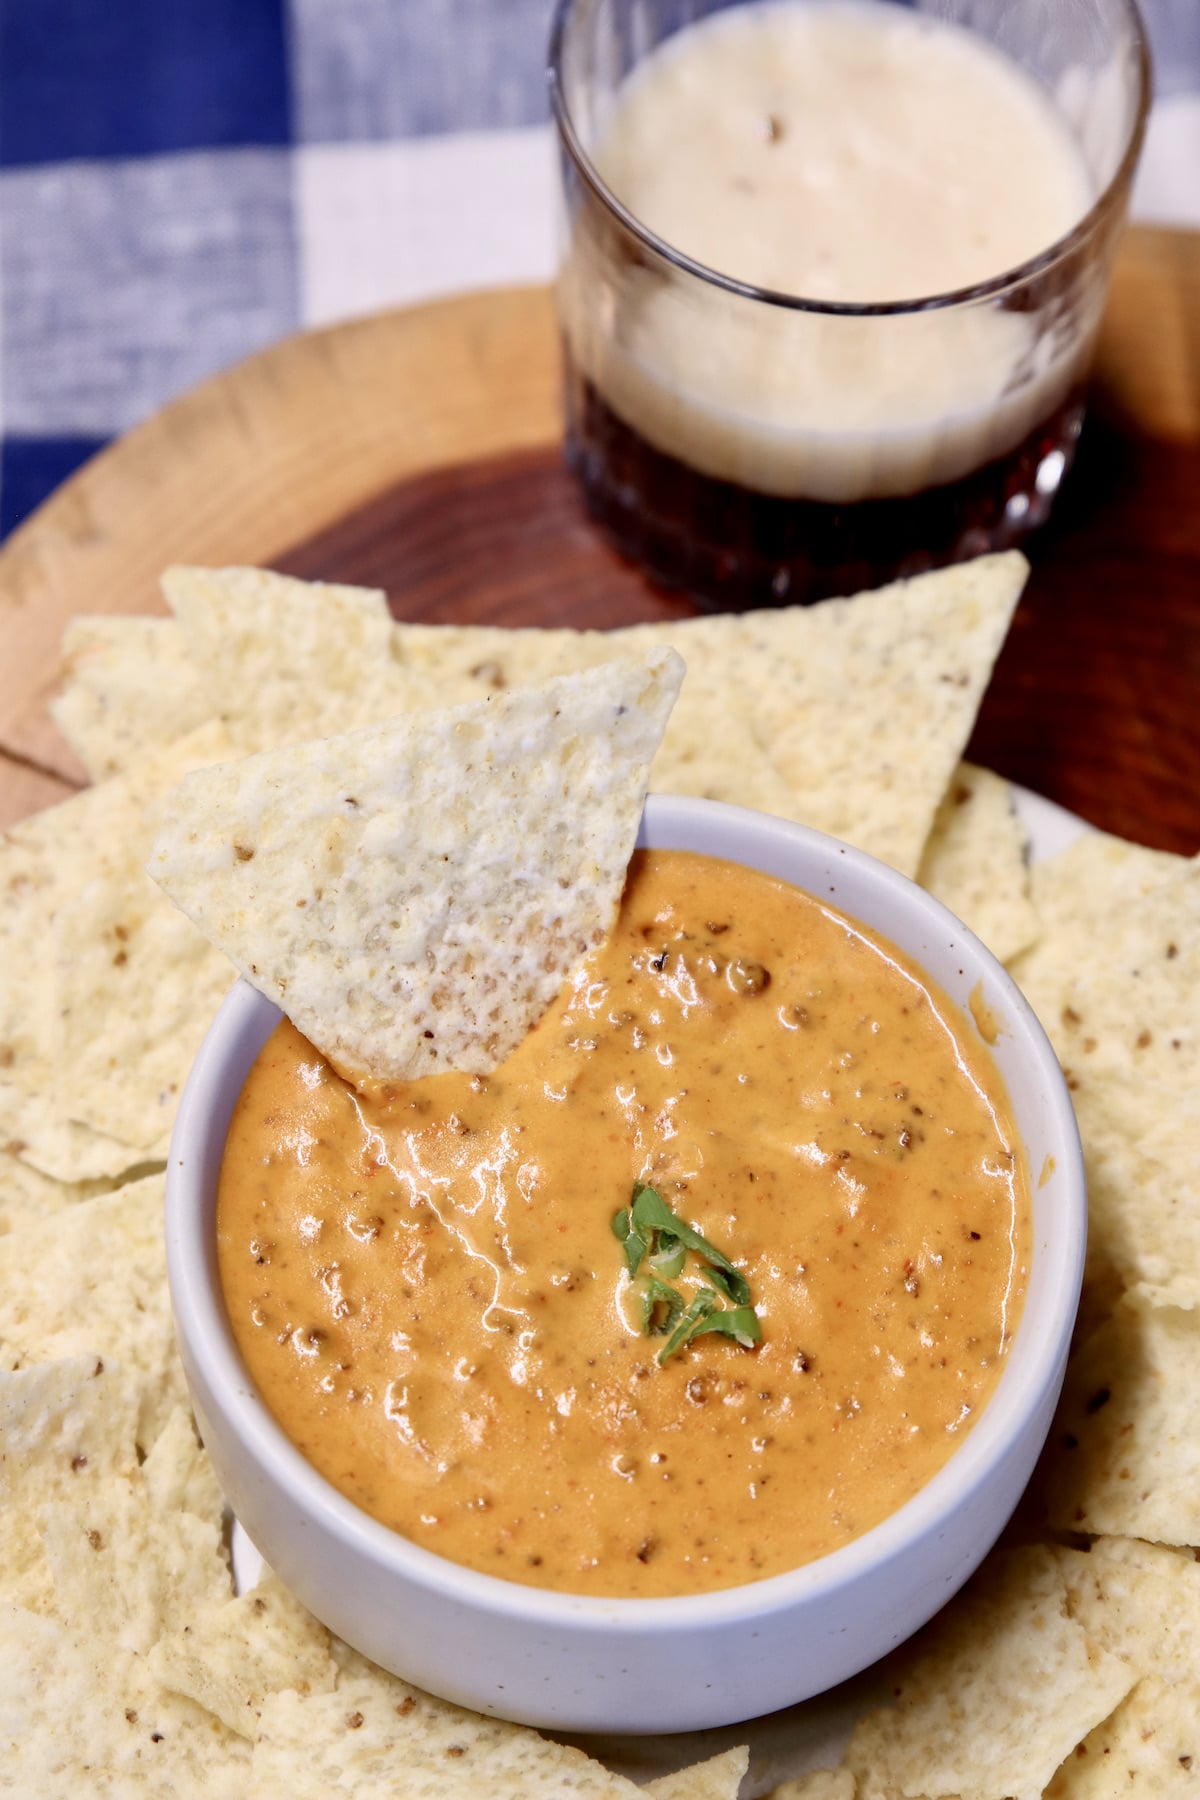 chili cheese dip in a bowl with tortilla chips.